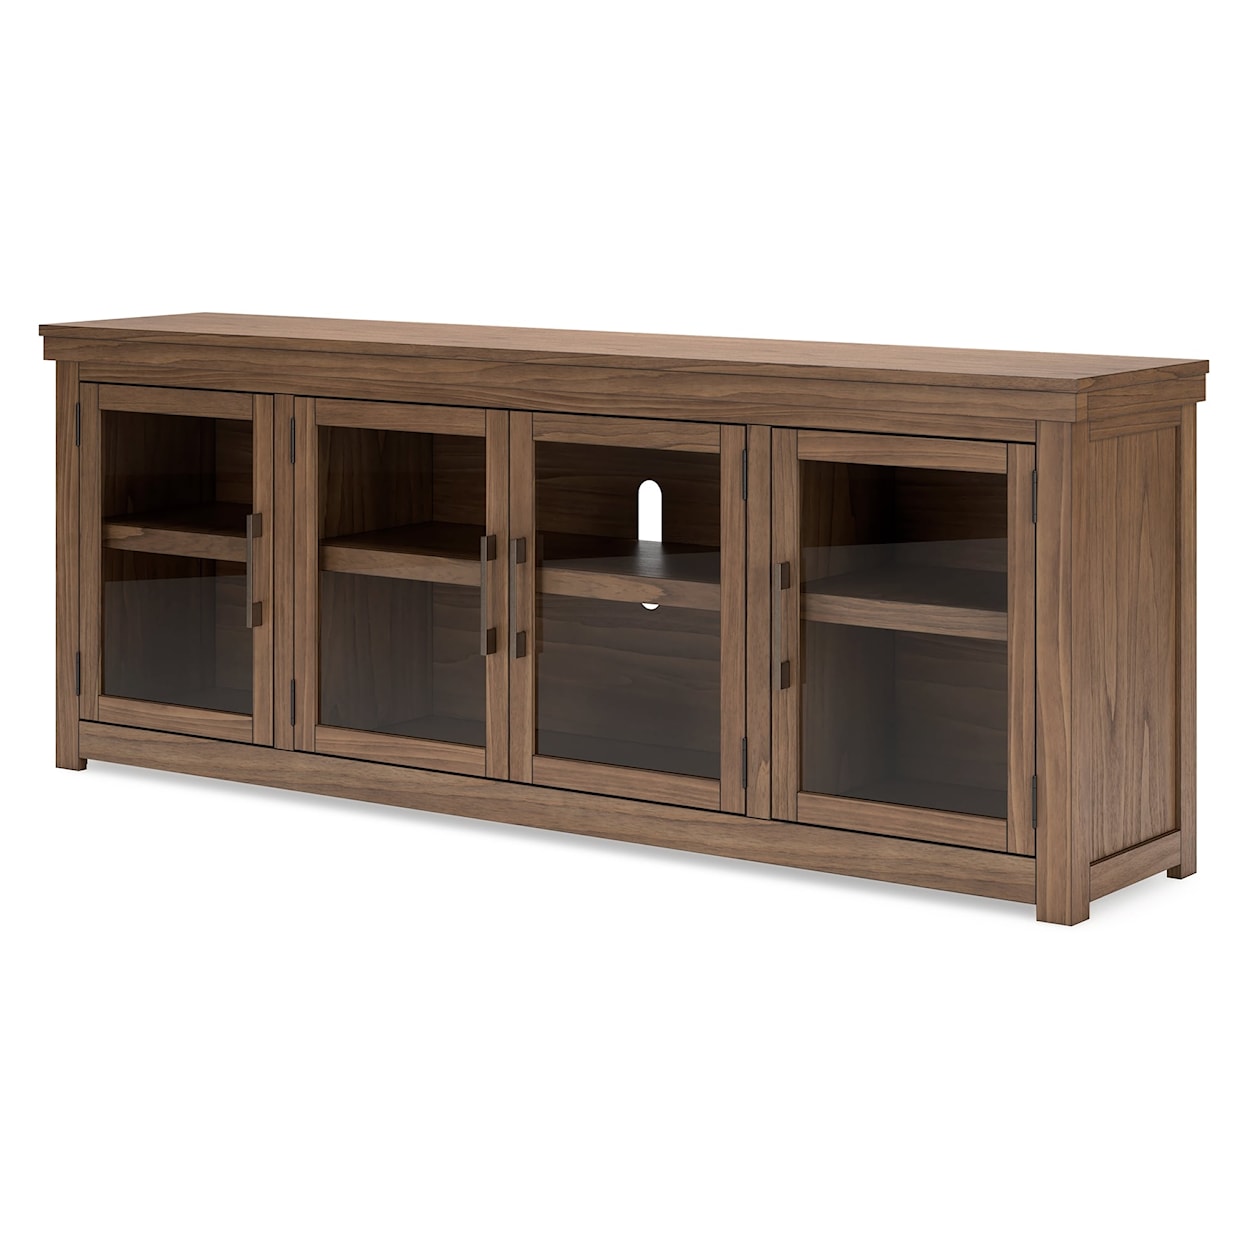 StyleLine Boardernest Extra Large TV Stand